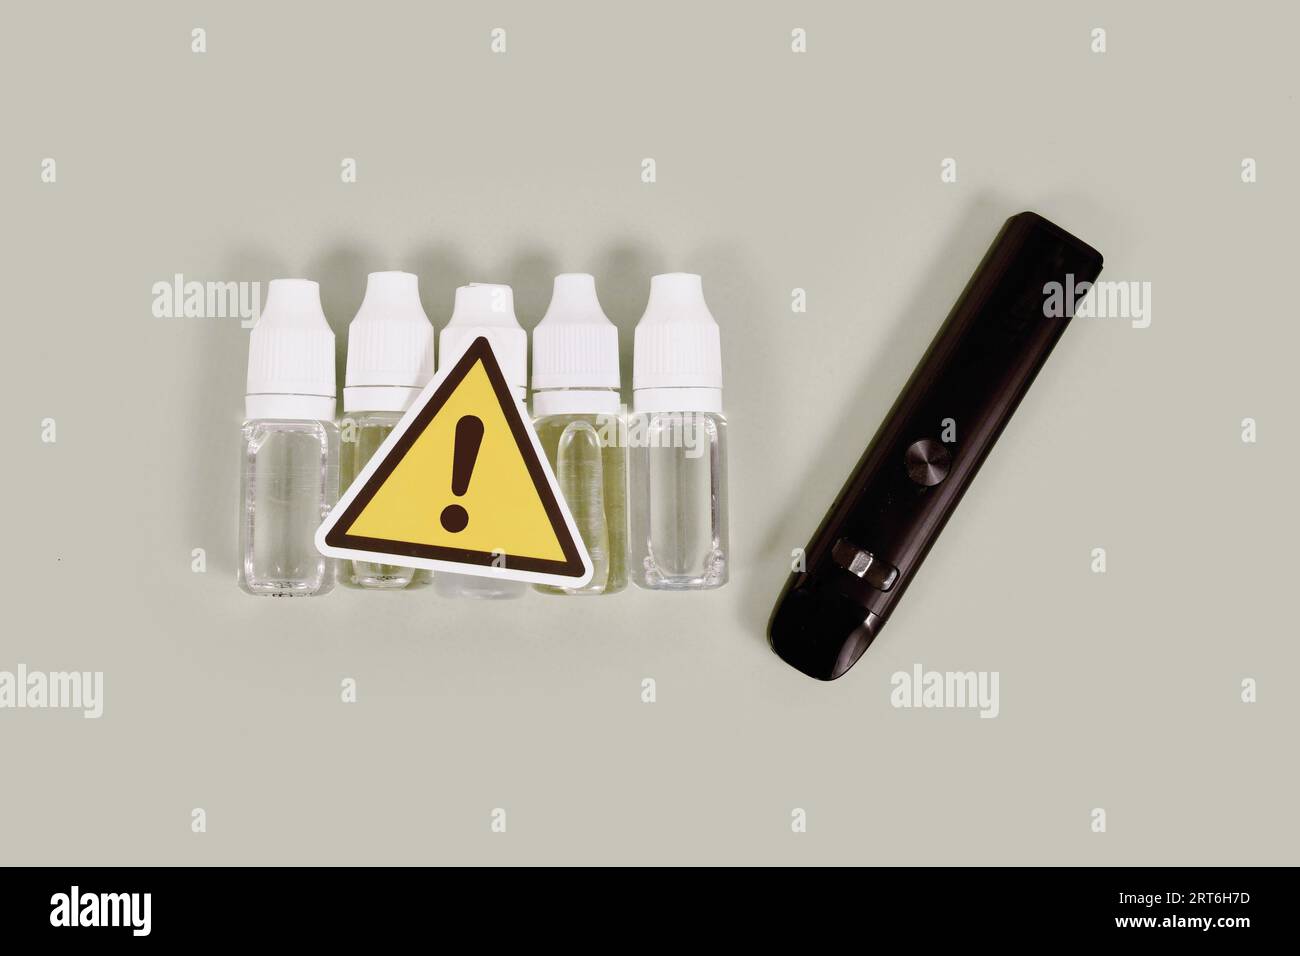 Bottles with liquid solutions and electronic cigarettes with warning sign Stock Photo